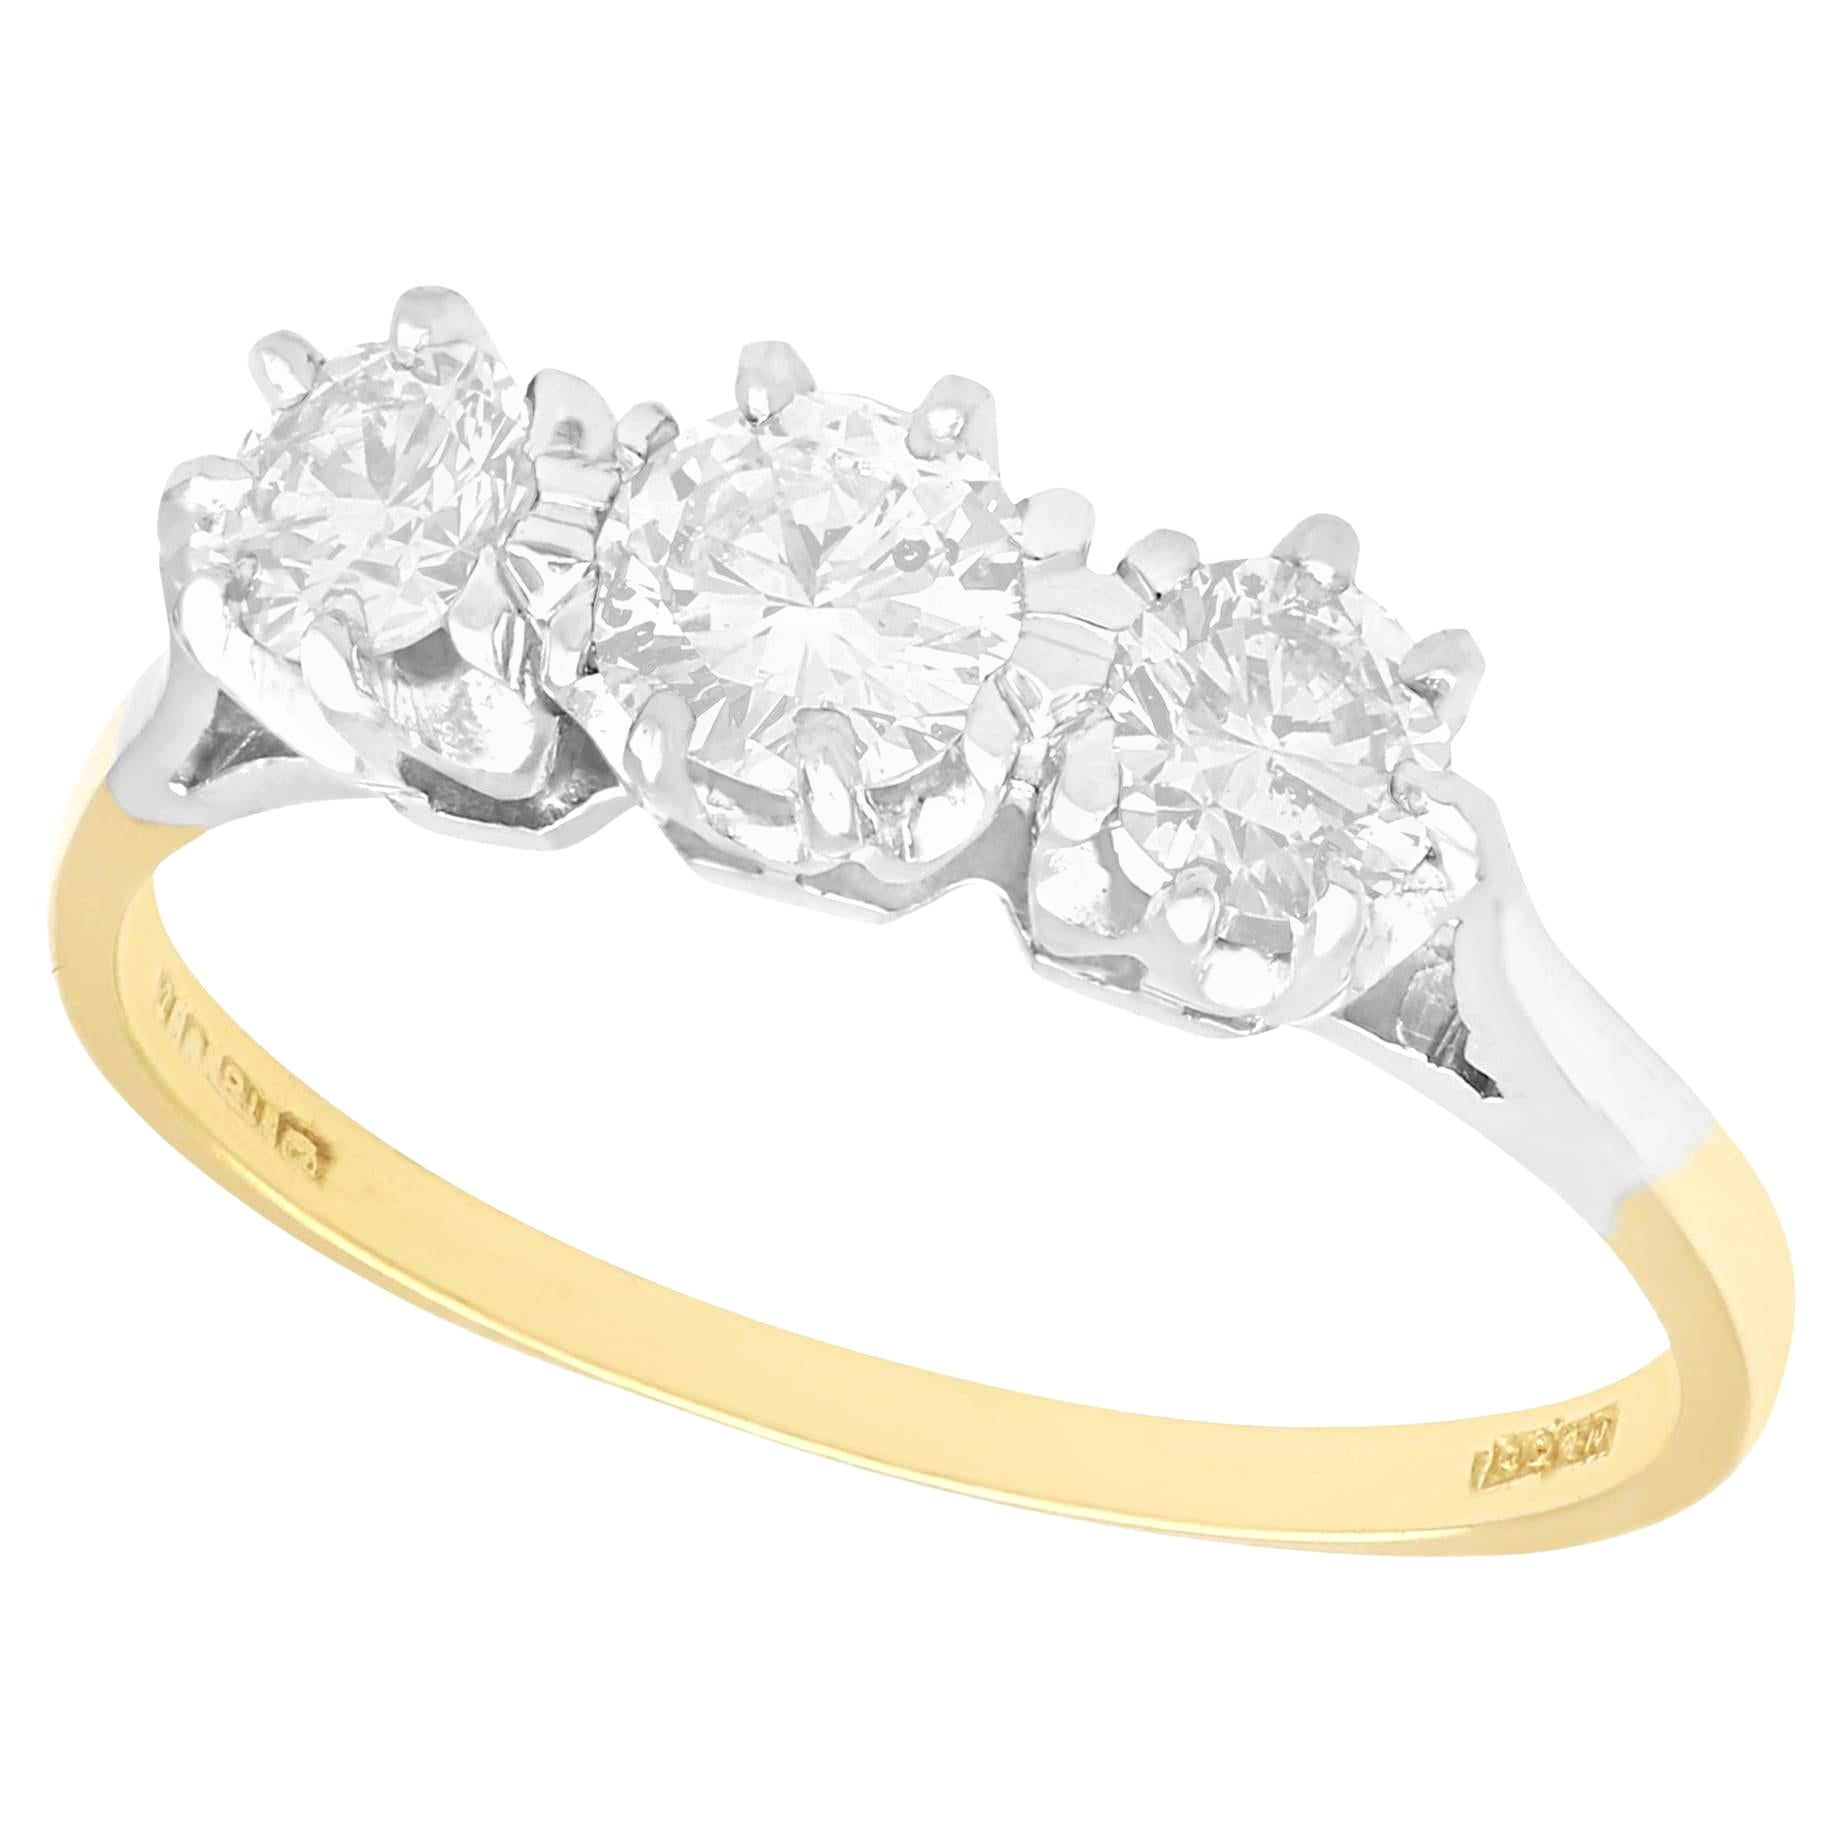 1.01 Carat Diamond and Yellow Gold Trilogy Engagement Ring For Sale